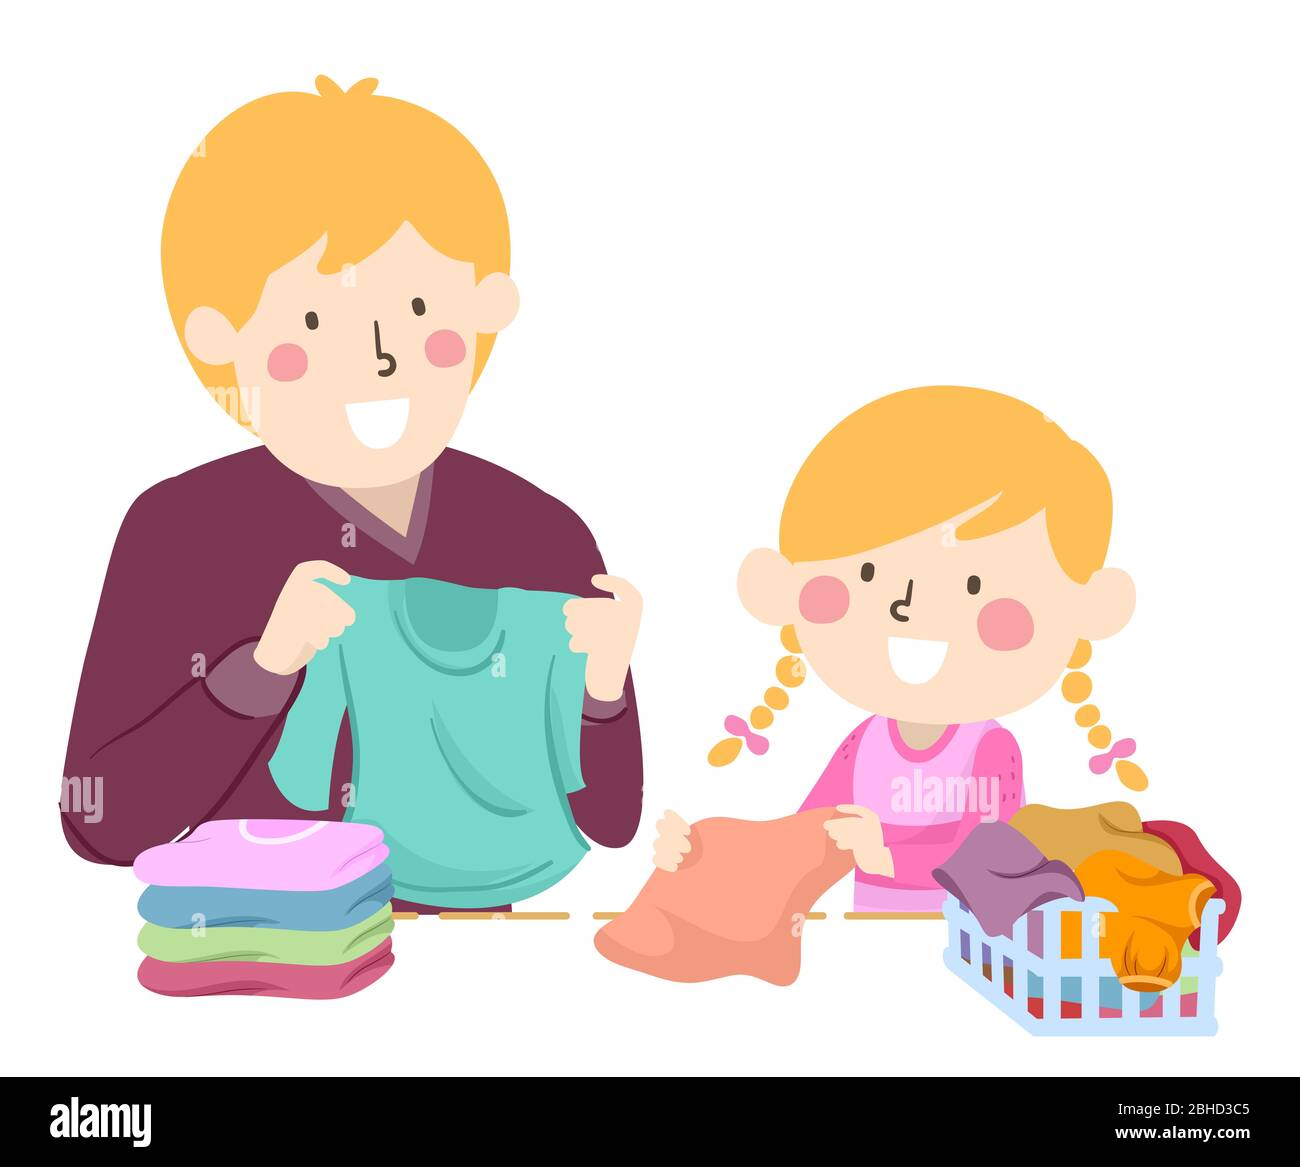 Father girl laundry Cut Out Stock Images & Pictures - Alamy